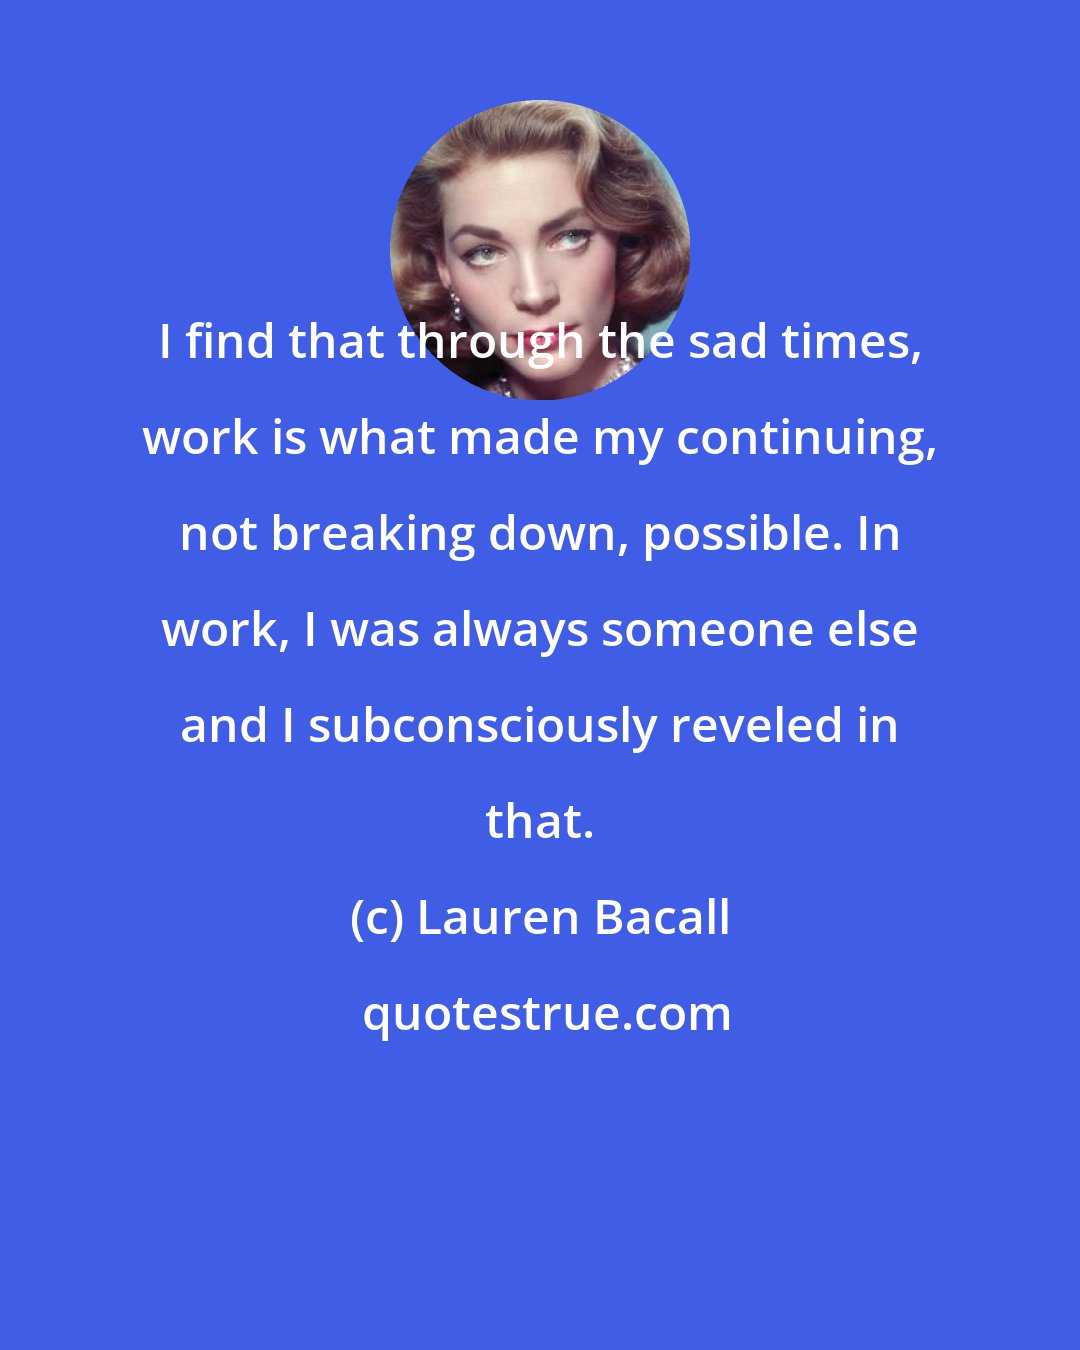 Lauren Bacall: I find that through the sad times, work is what made my continuing, not breaking down, possible. In work, I was always someone else and I subconsciously reveled in that.